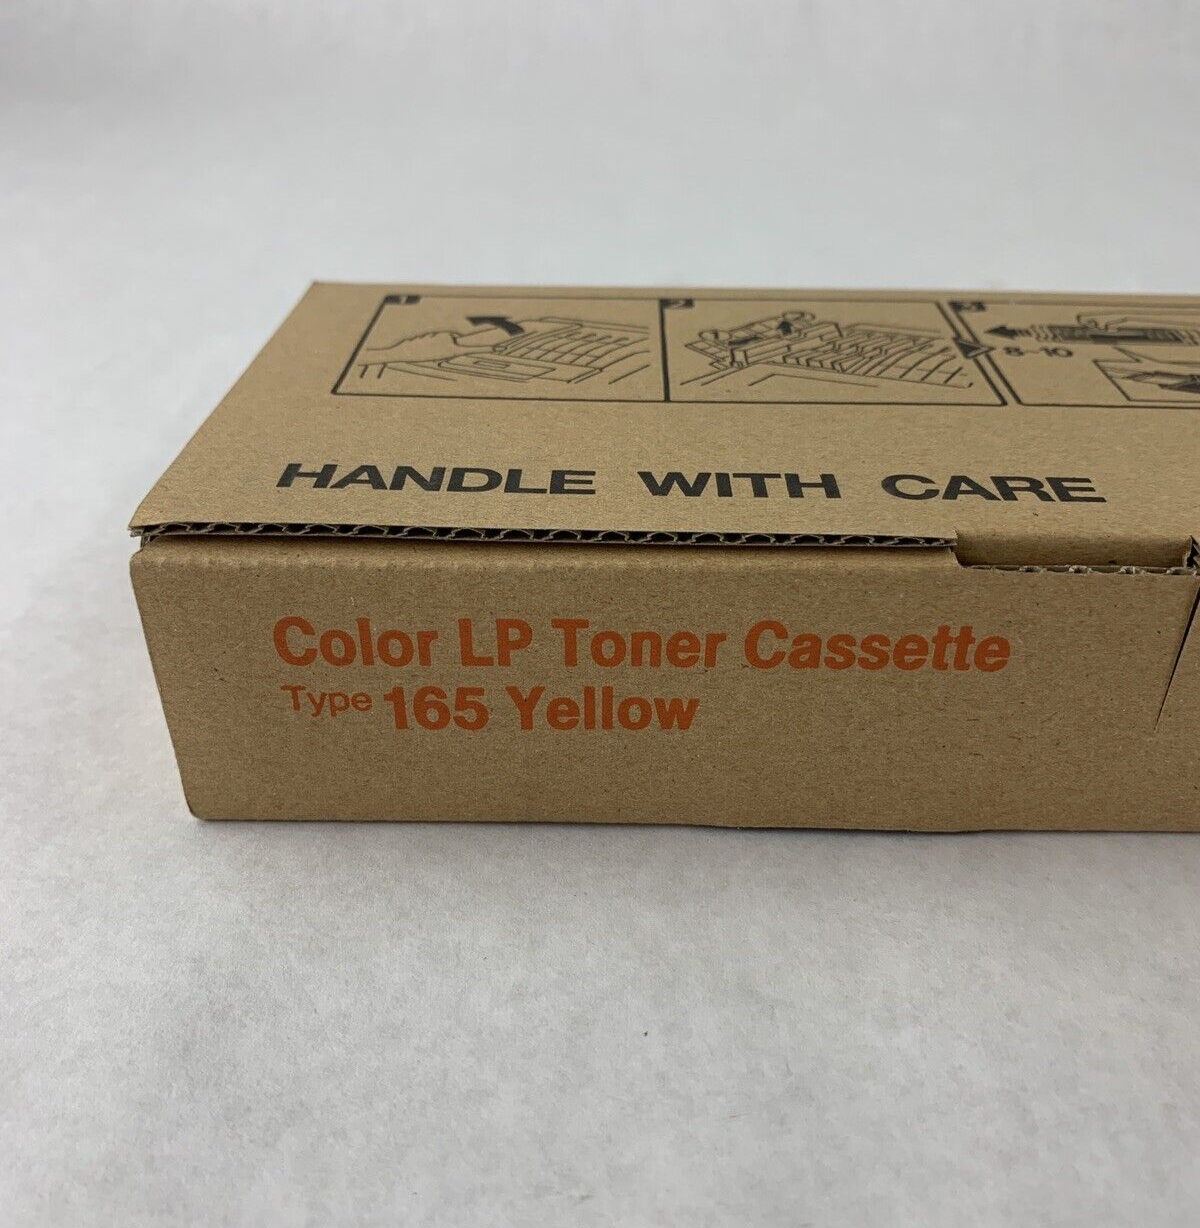 New Box Opened Sealed Ricoh Color LP Toner Cassette Type 165 Yellow